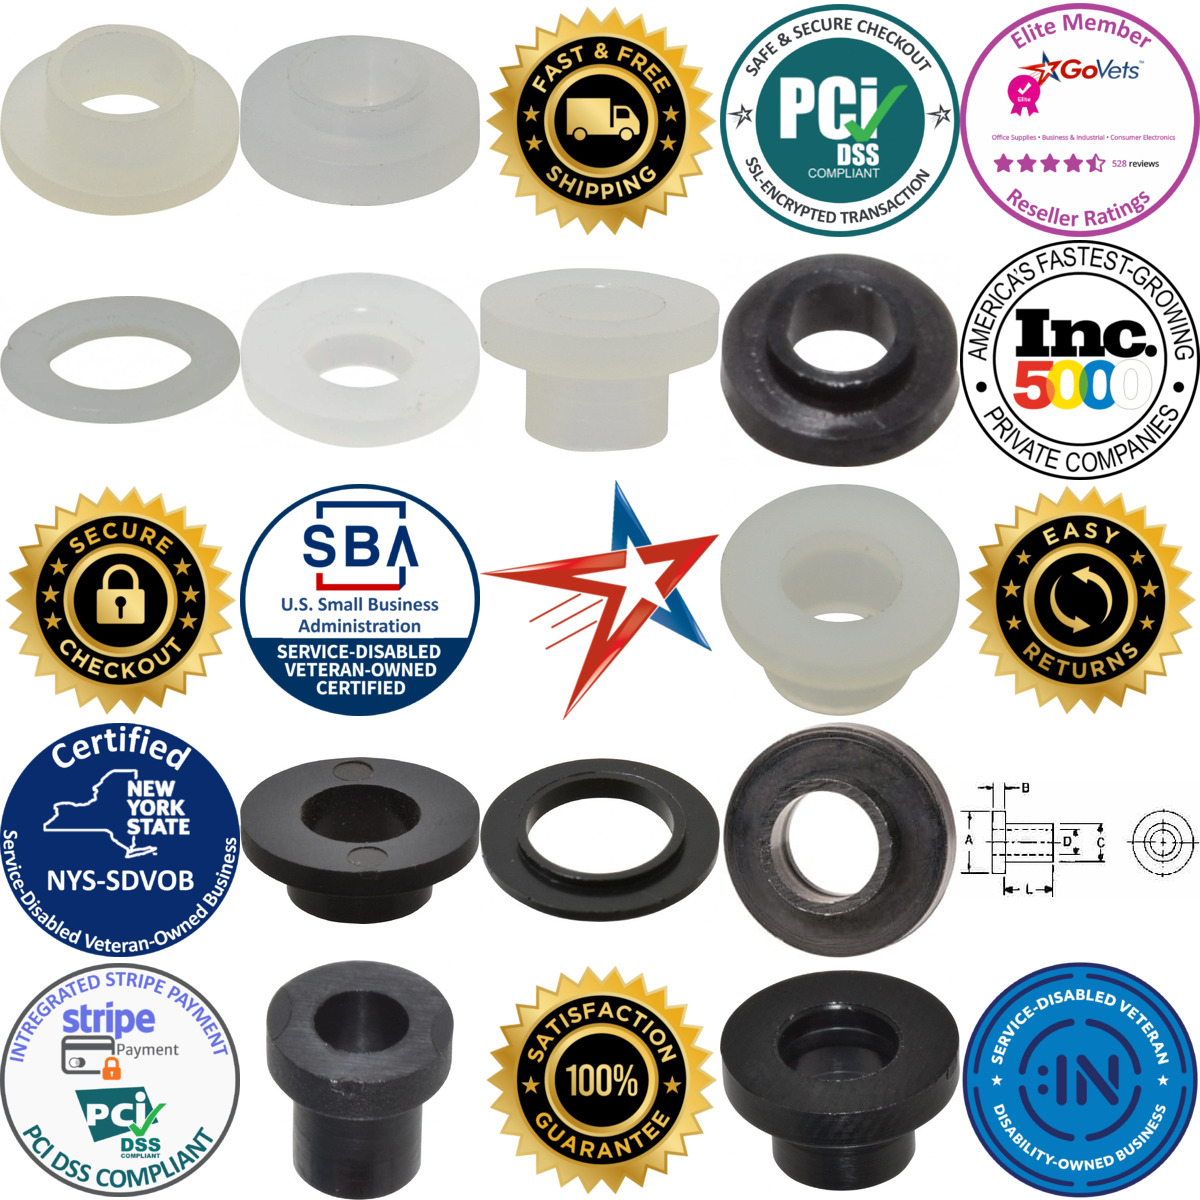 A selection of Shoulder Washers products on GoVets